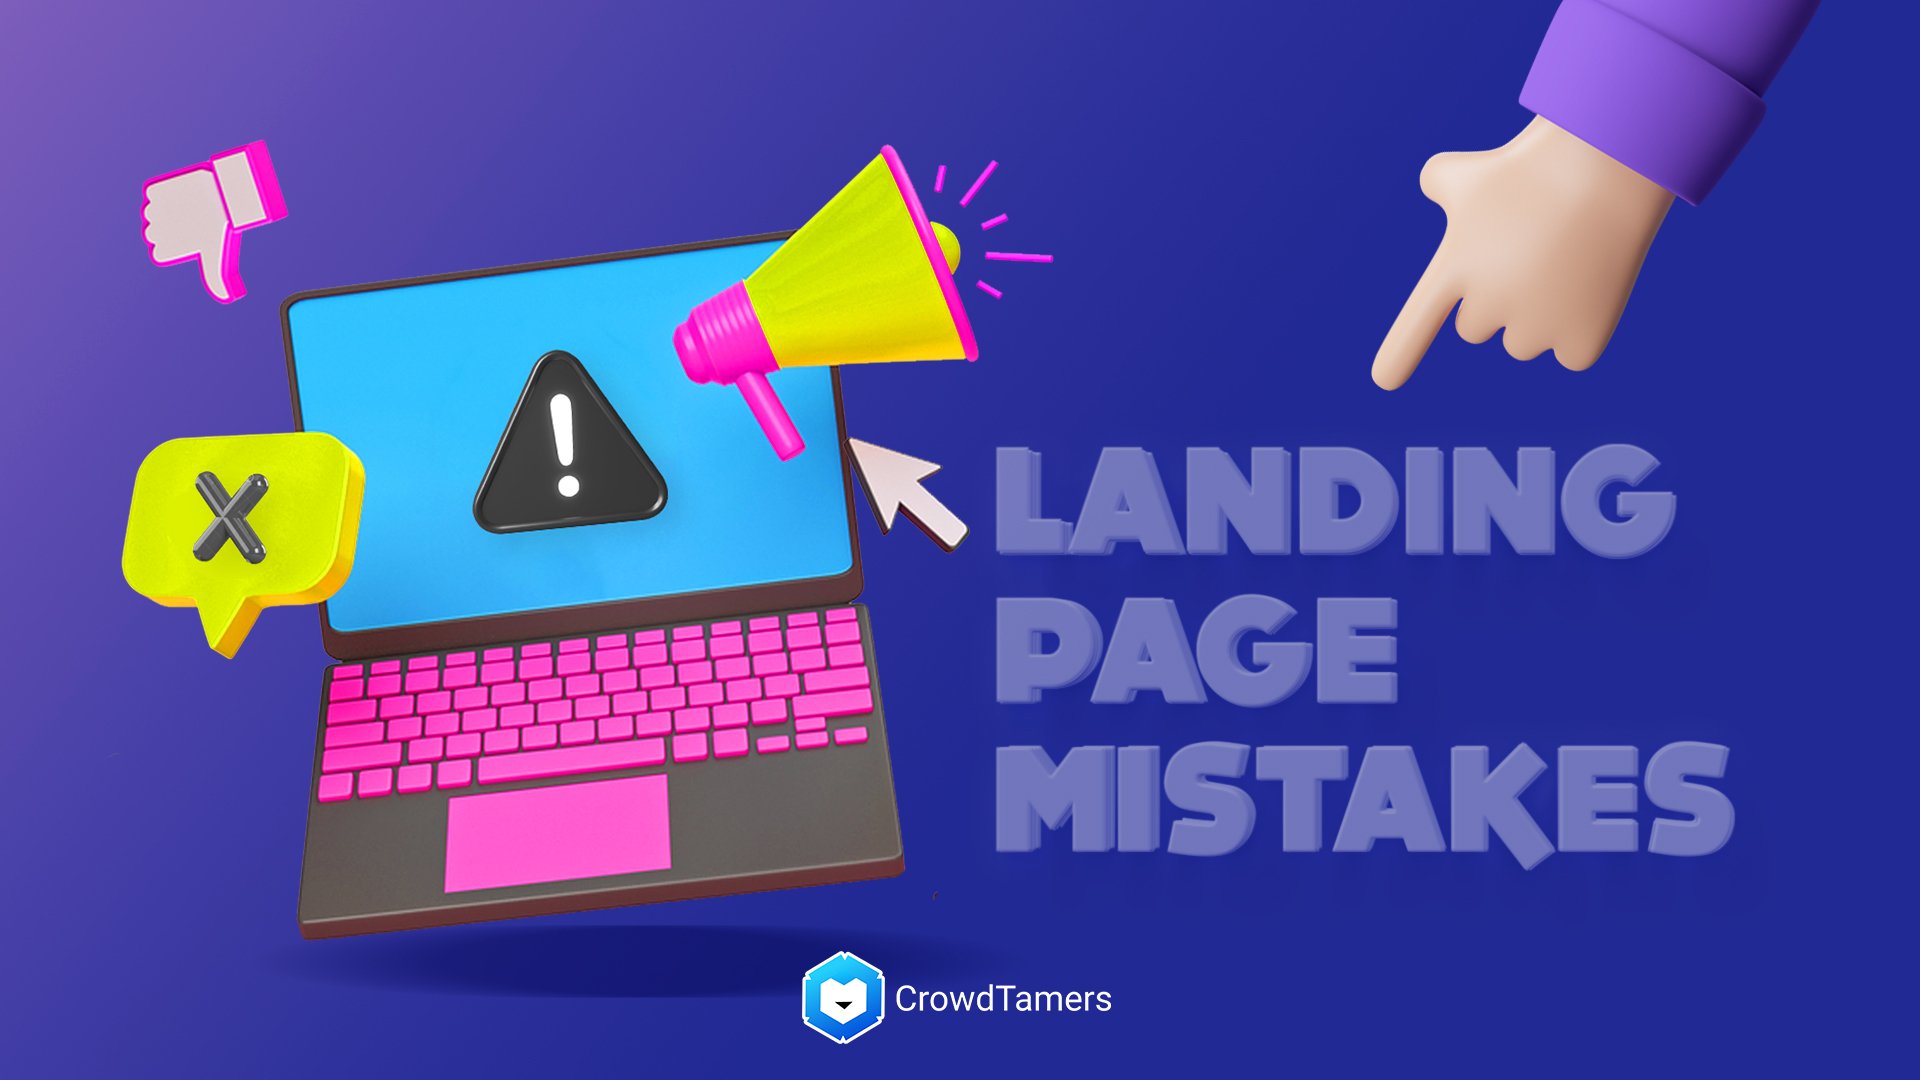 Landing page mistakes that affect your conversion rates.